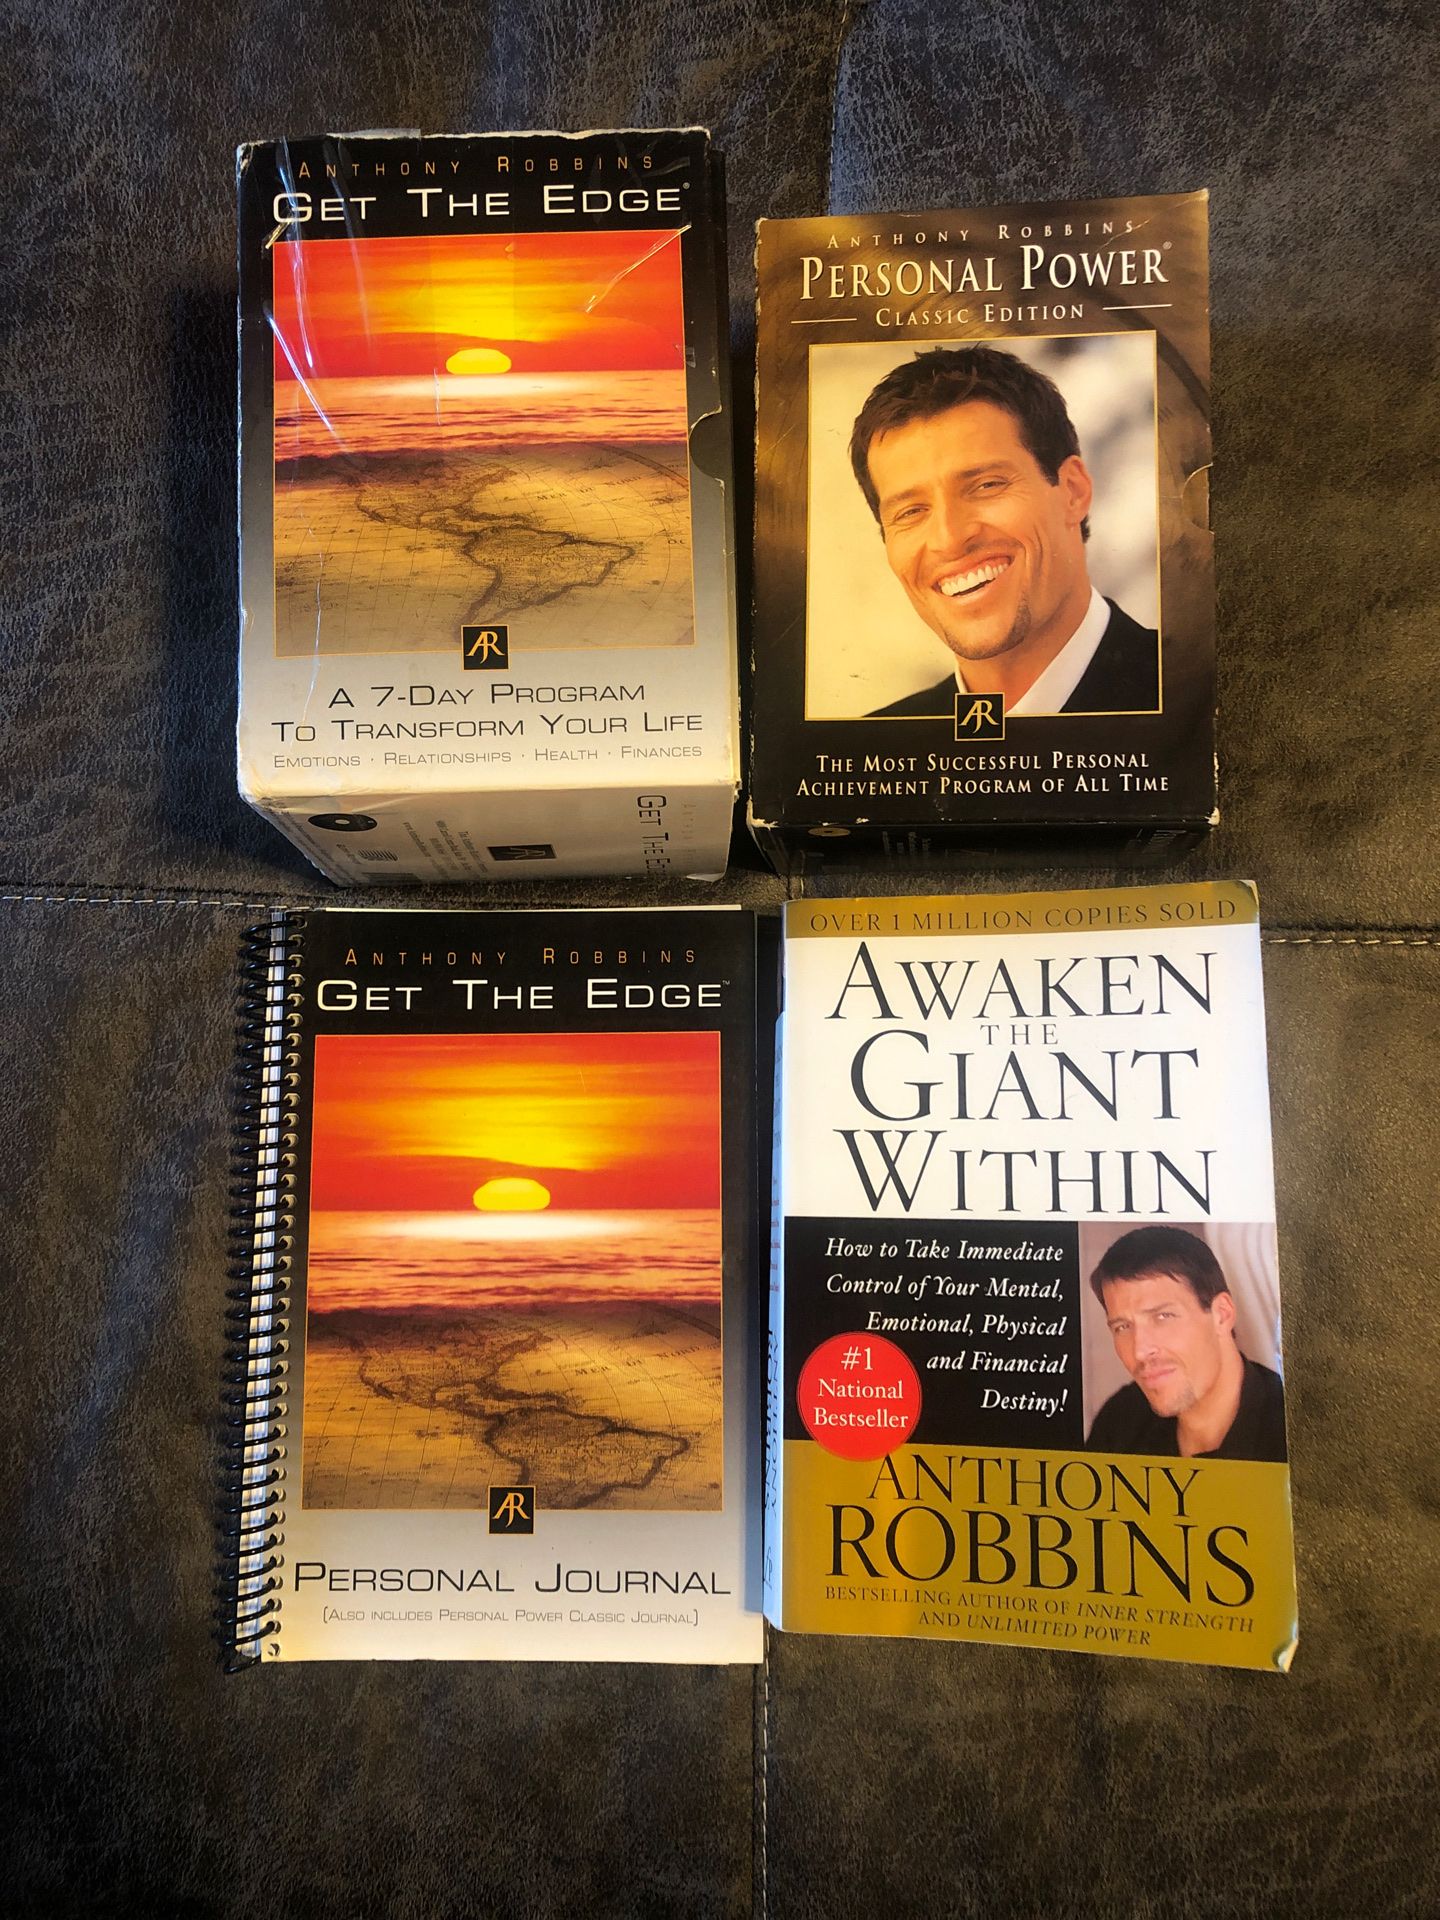 Get the edge - Personal power - Anthony Robbins